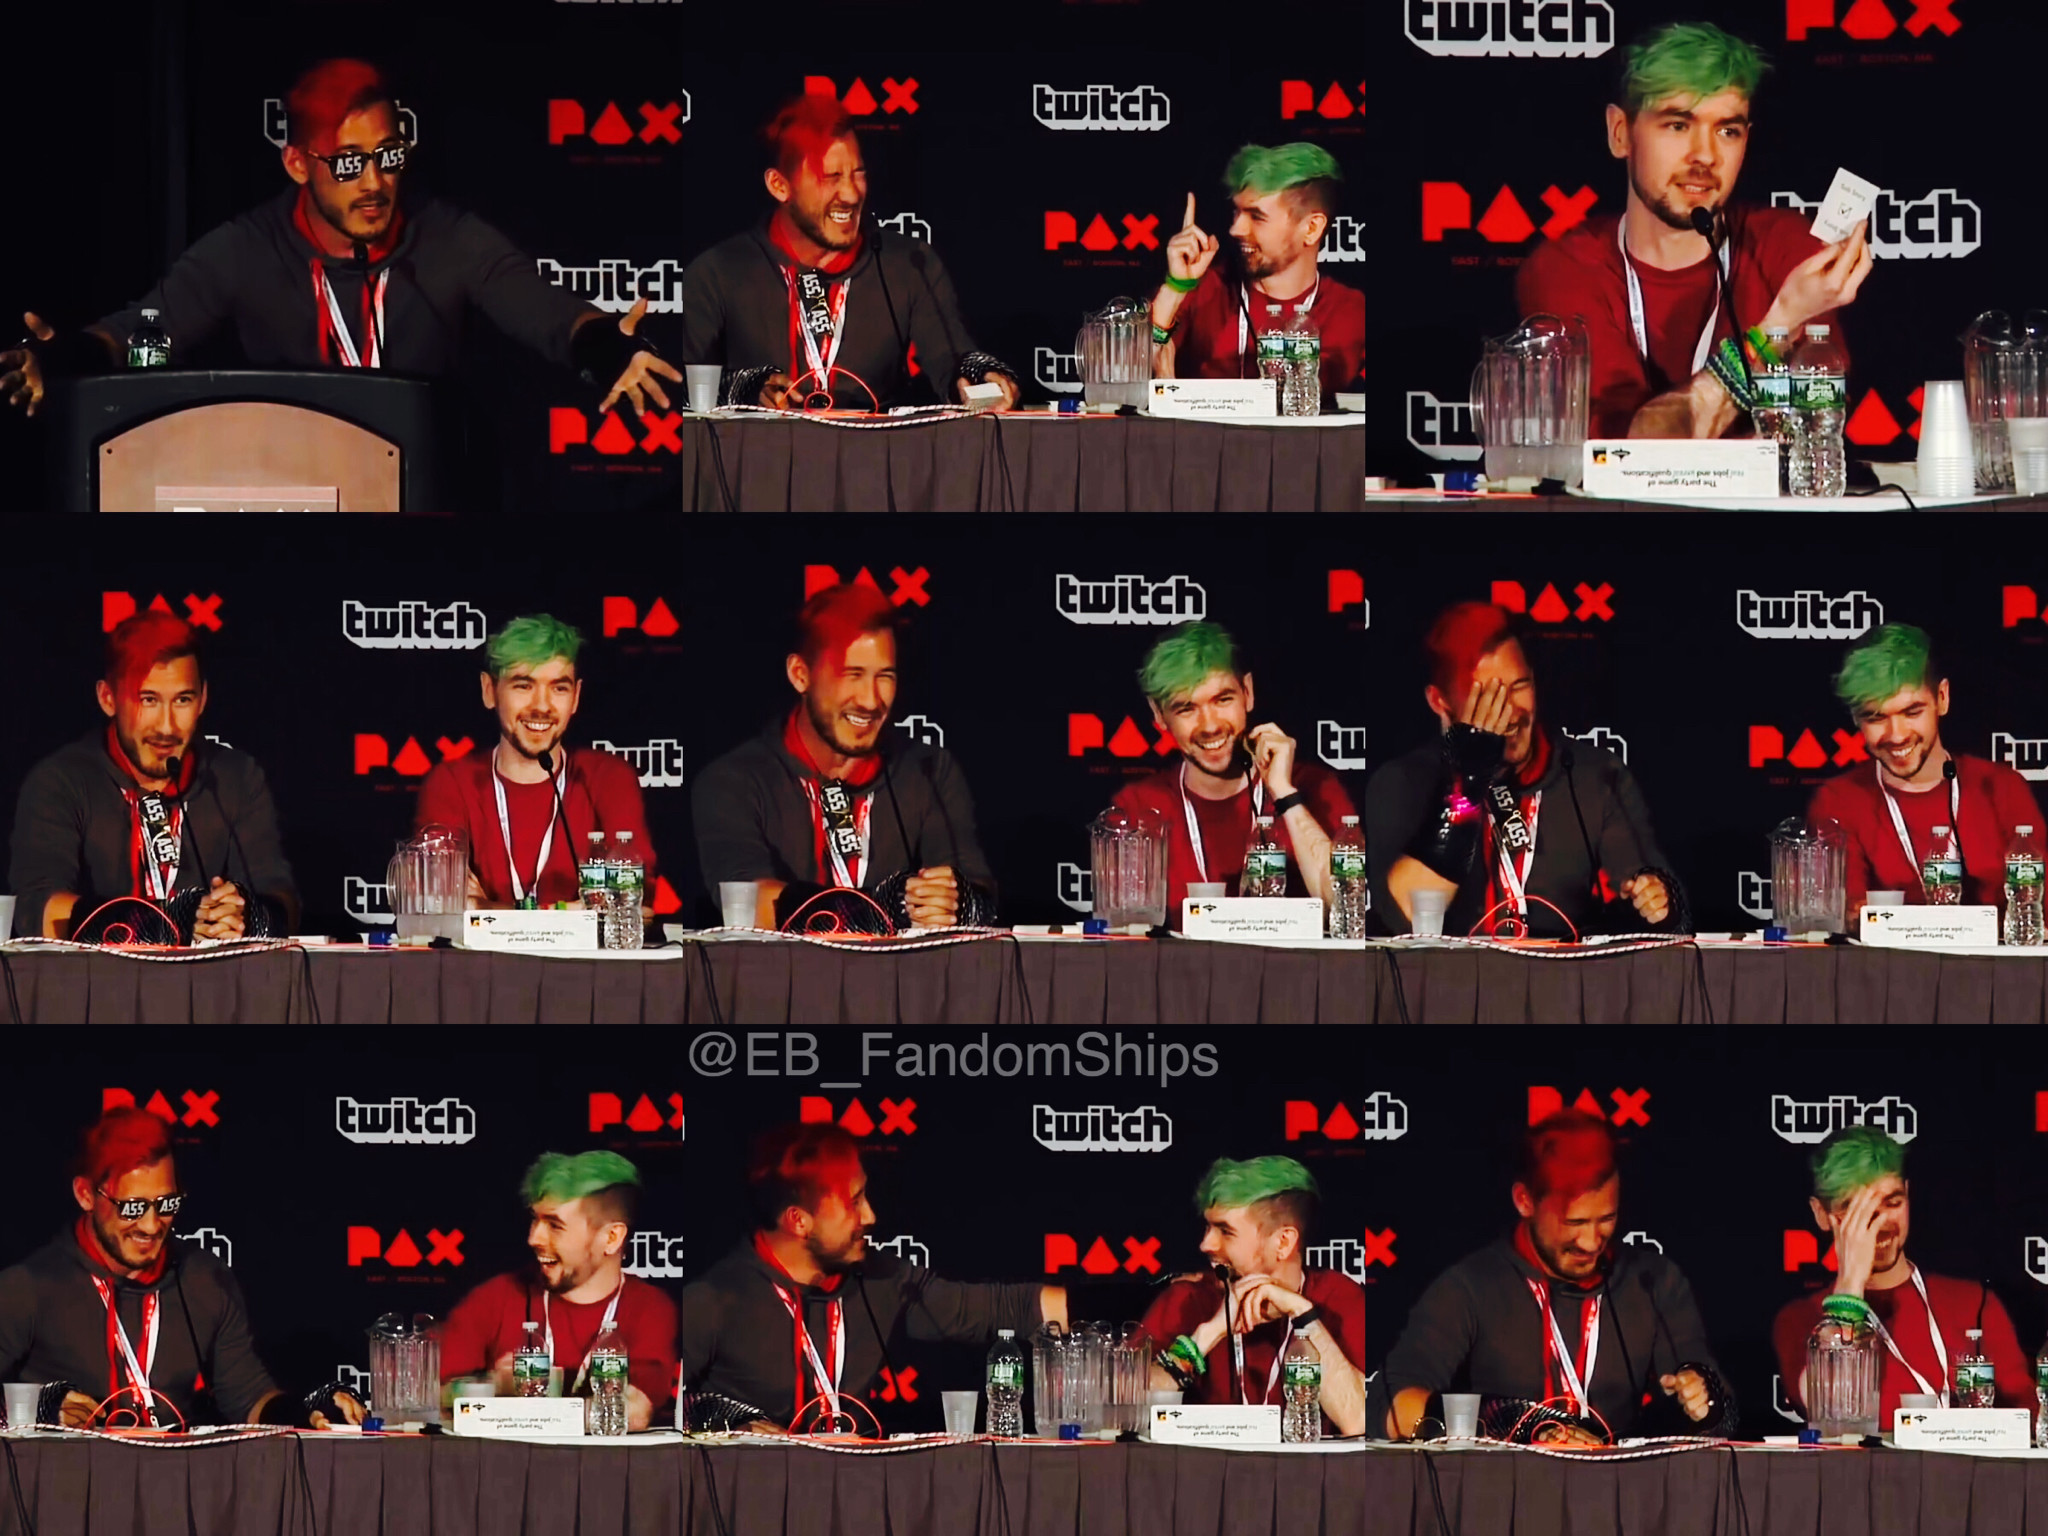 2048x1536 Mark, Sean and Wade at PAX East 2016 'Markiplier and friends' Panel â¤  Markiplier / Mark Edward Fischbach / Jacksepticeye / Septiplier / Sean  McLoughlin ...